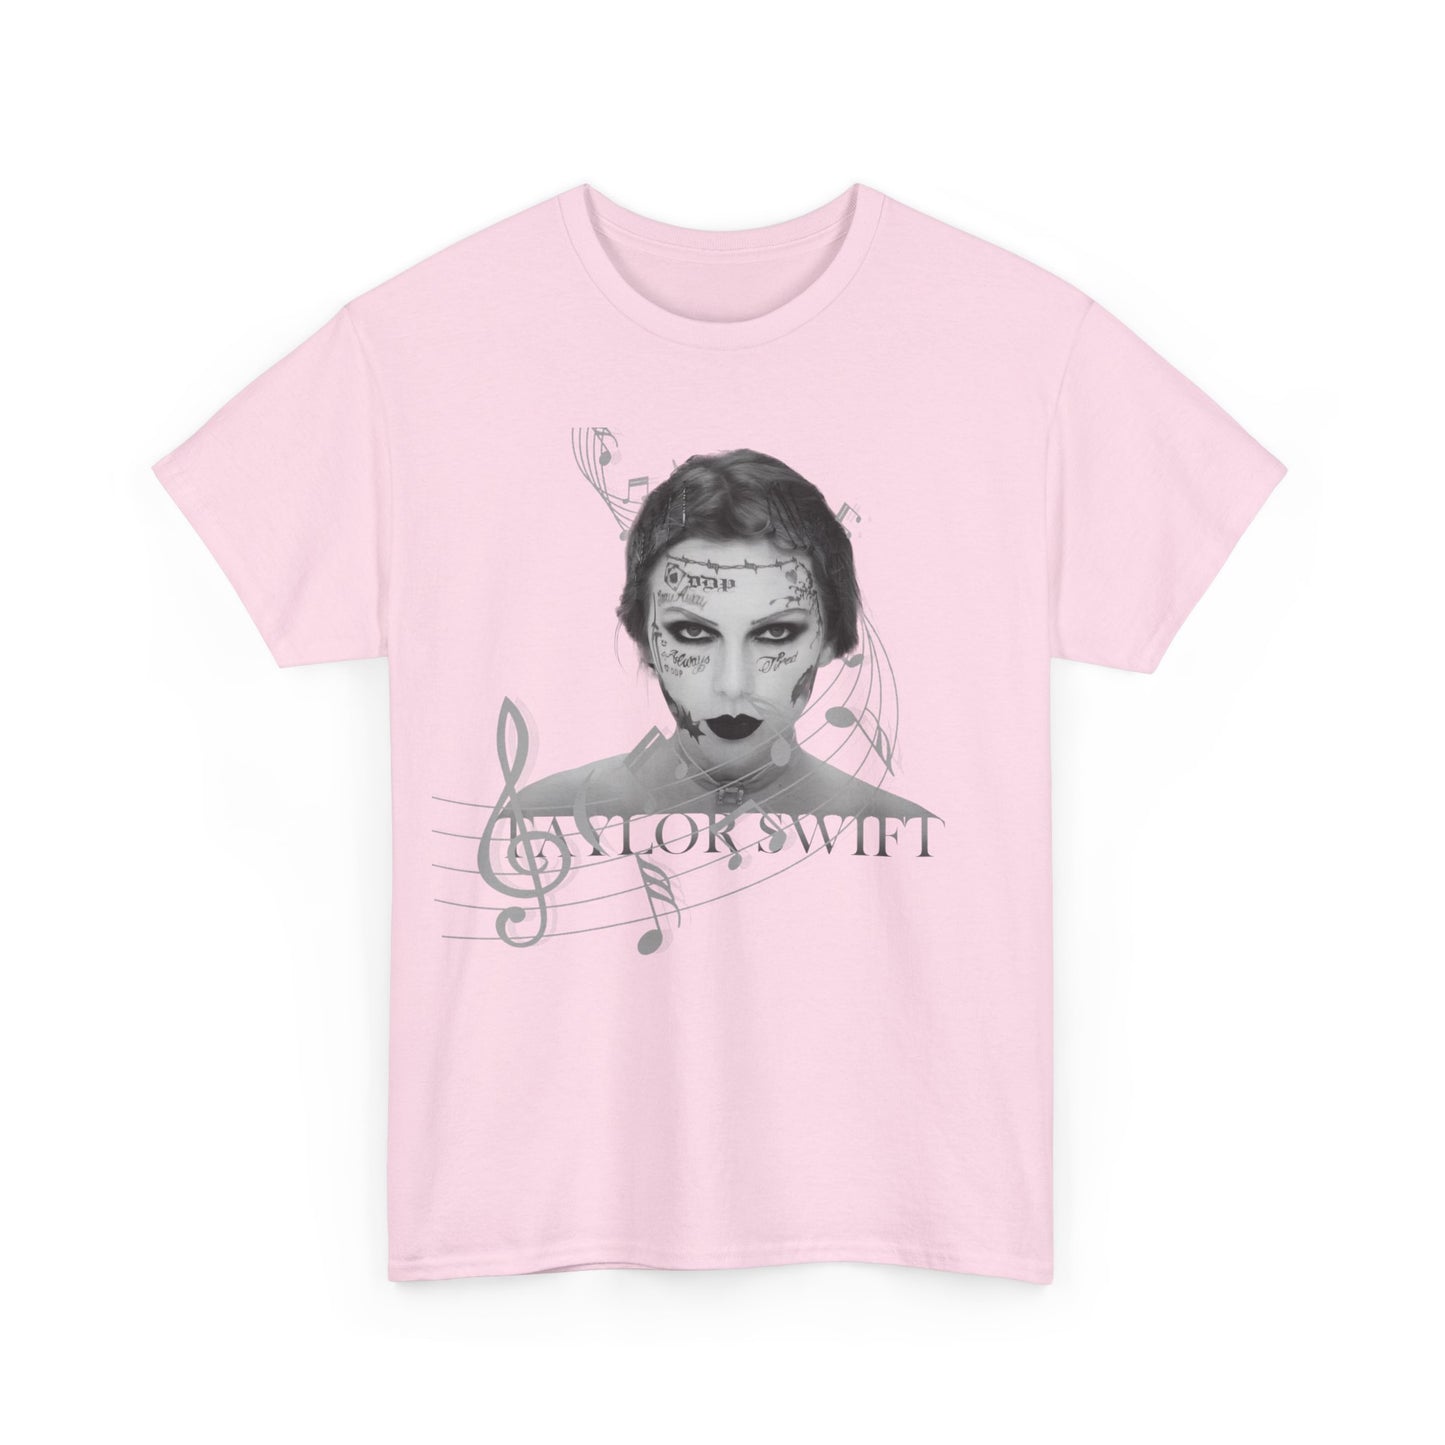 Taylor Swift The Tortured Poets Department High Quality Printed Unisex Heavy Cotton T-shirt